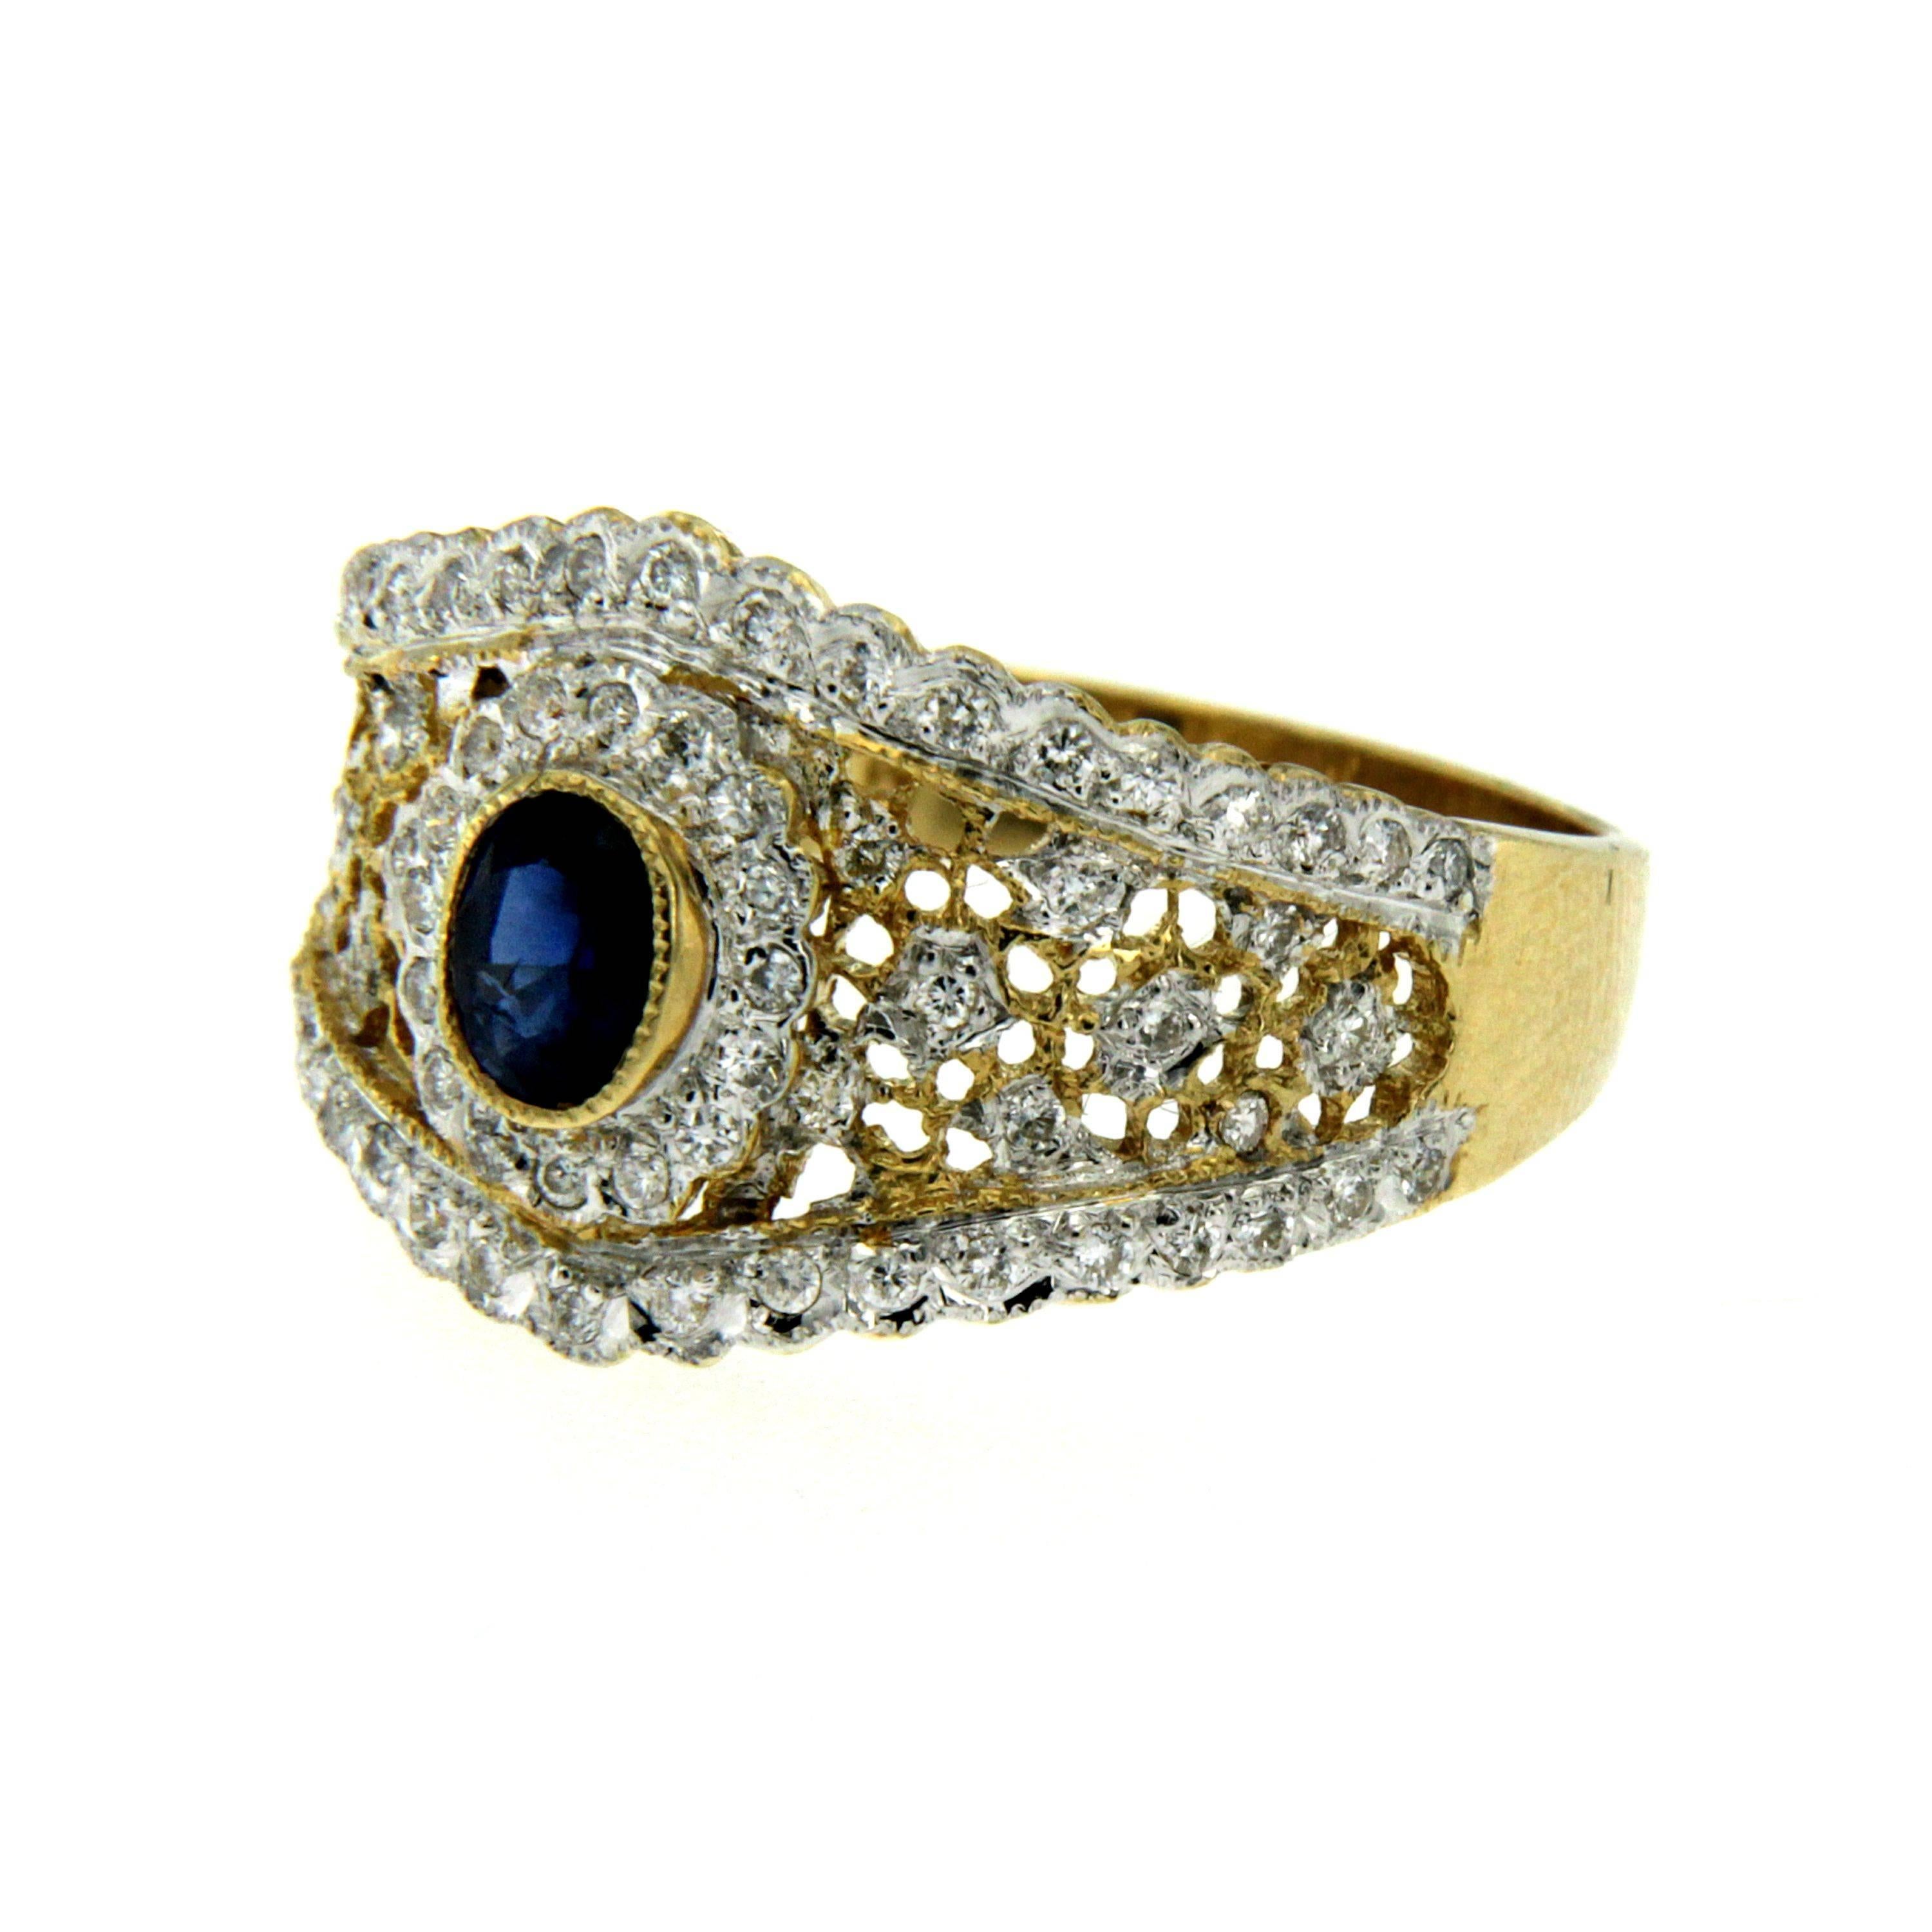 A gorgeous cocktail ring handmade in 18k yellow Gold showcasing a Natural Sapphire in the center weighing approx. 0.30 carat and surrounded by 0,80 carat of round brilliant-cut diamonds graded G color. Circa 1950

CONDITION: Pre-owned - Excellent